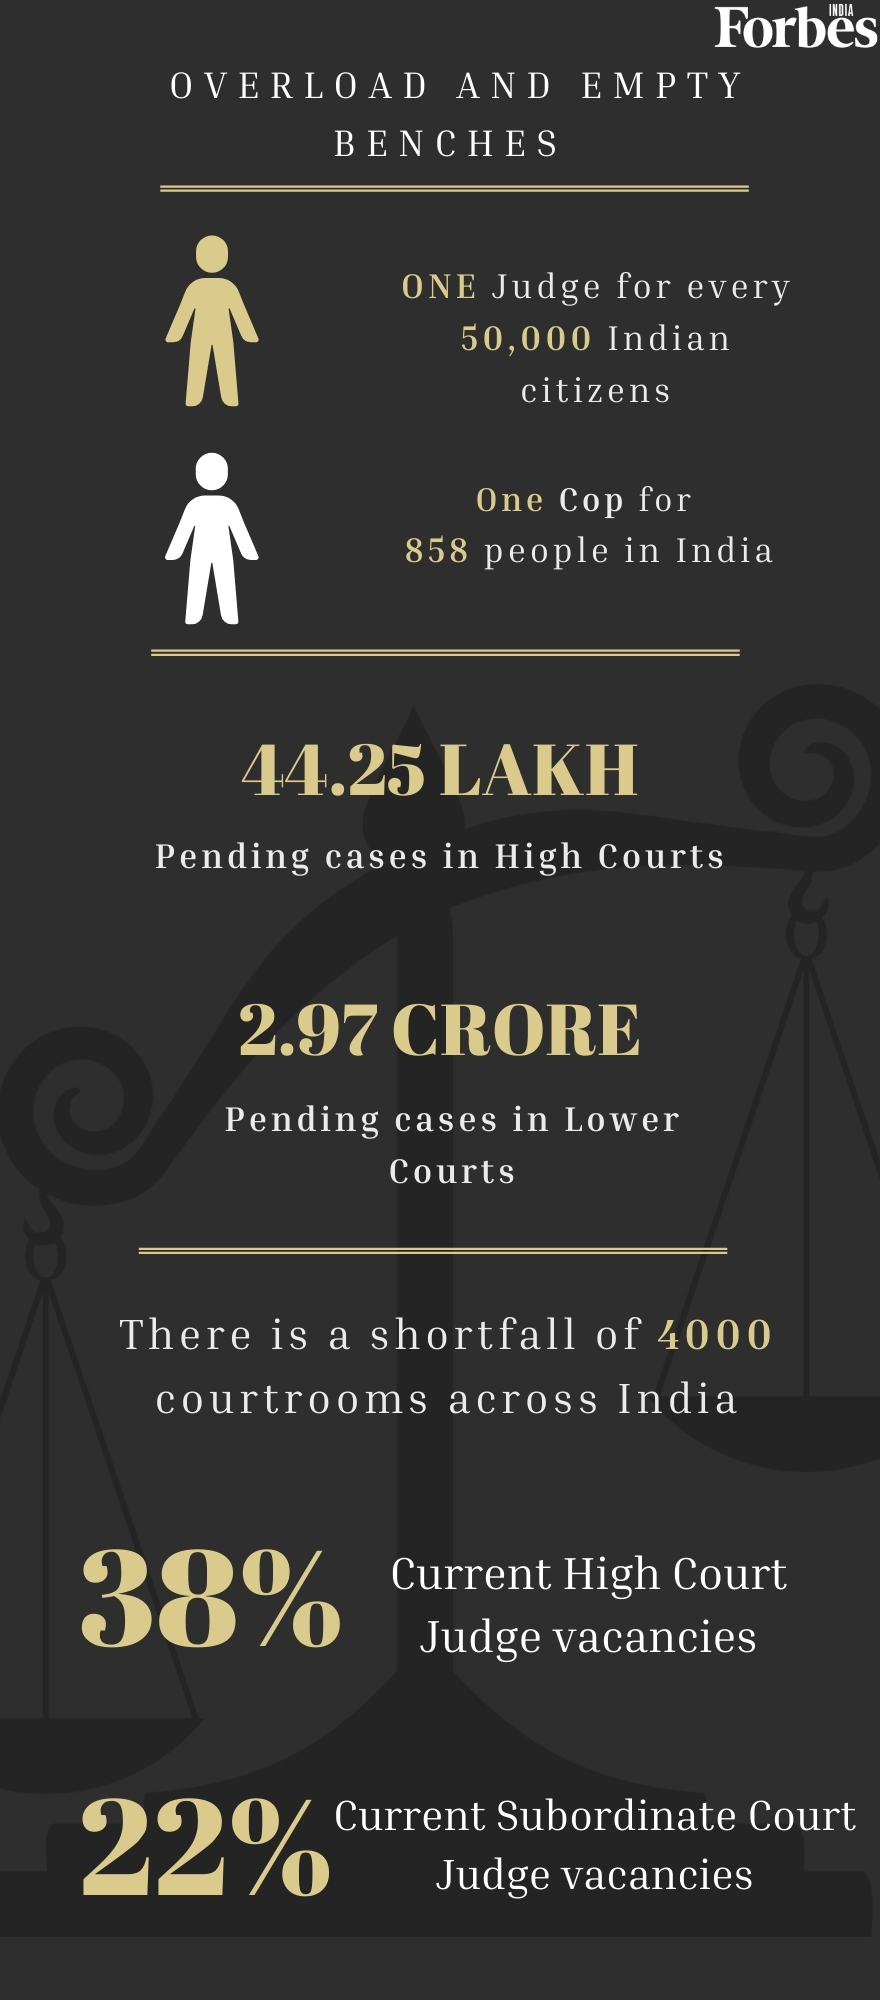 1 judge for every 50,000 people, 1 cop for every 858 citizens: India's justice system in numbers